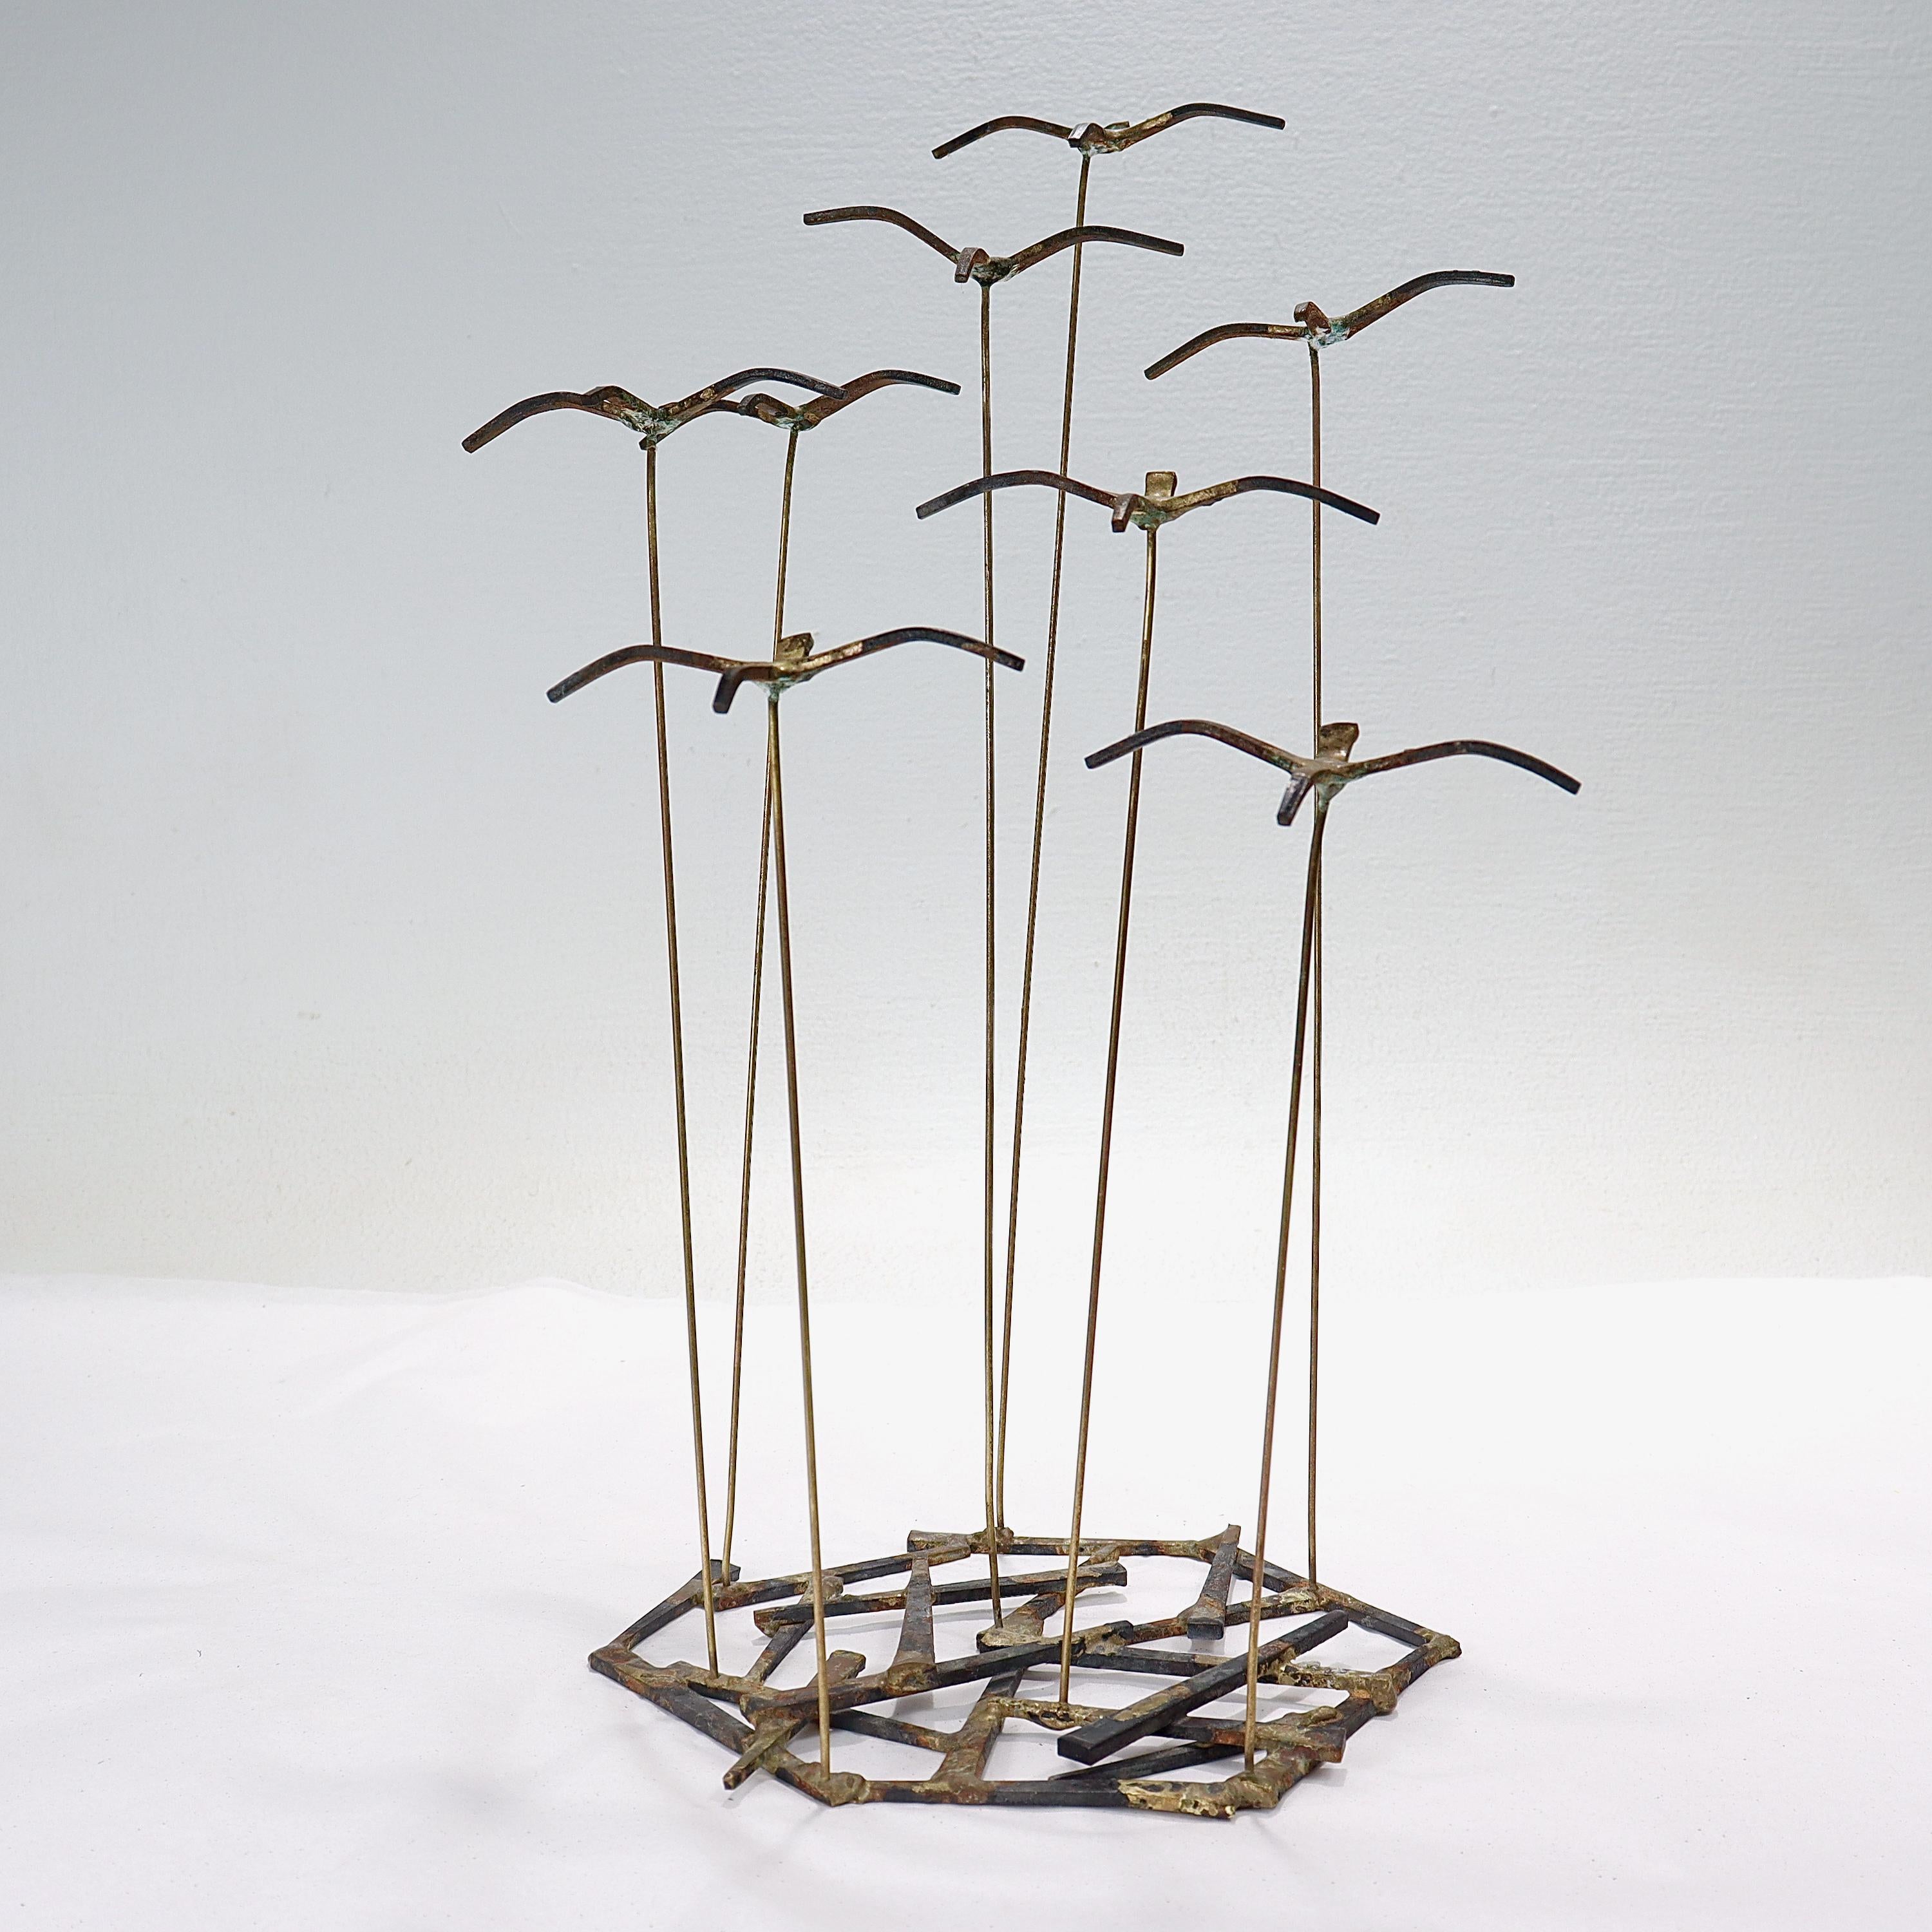 American Vintage Mid-Century Modern Cut Square Nail Curtis Jere Style Birds Sculpture  For Sale